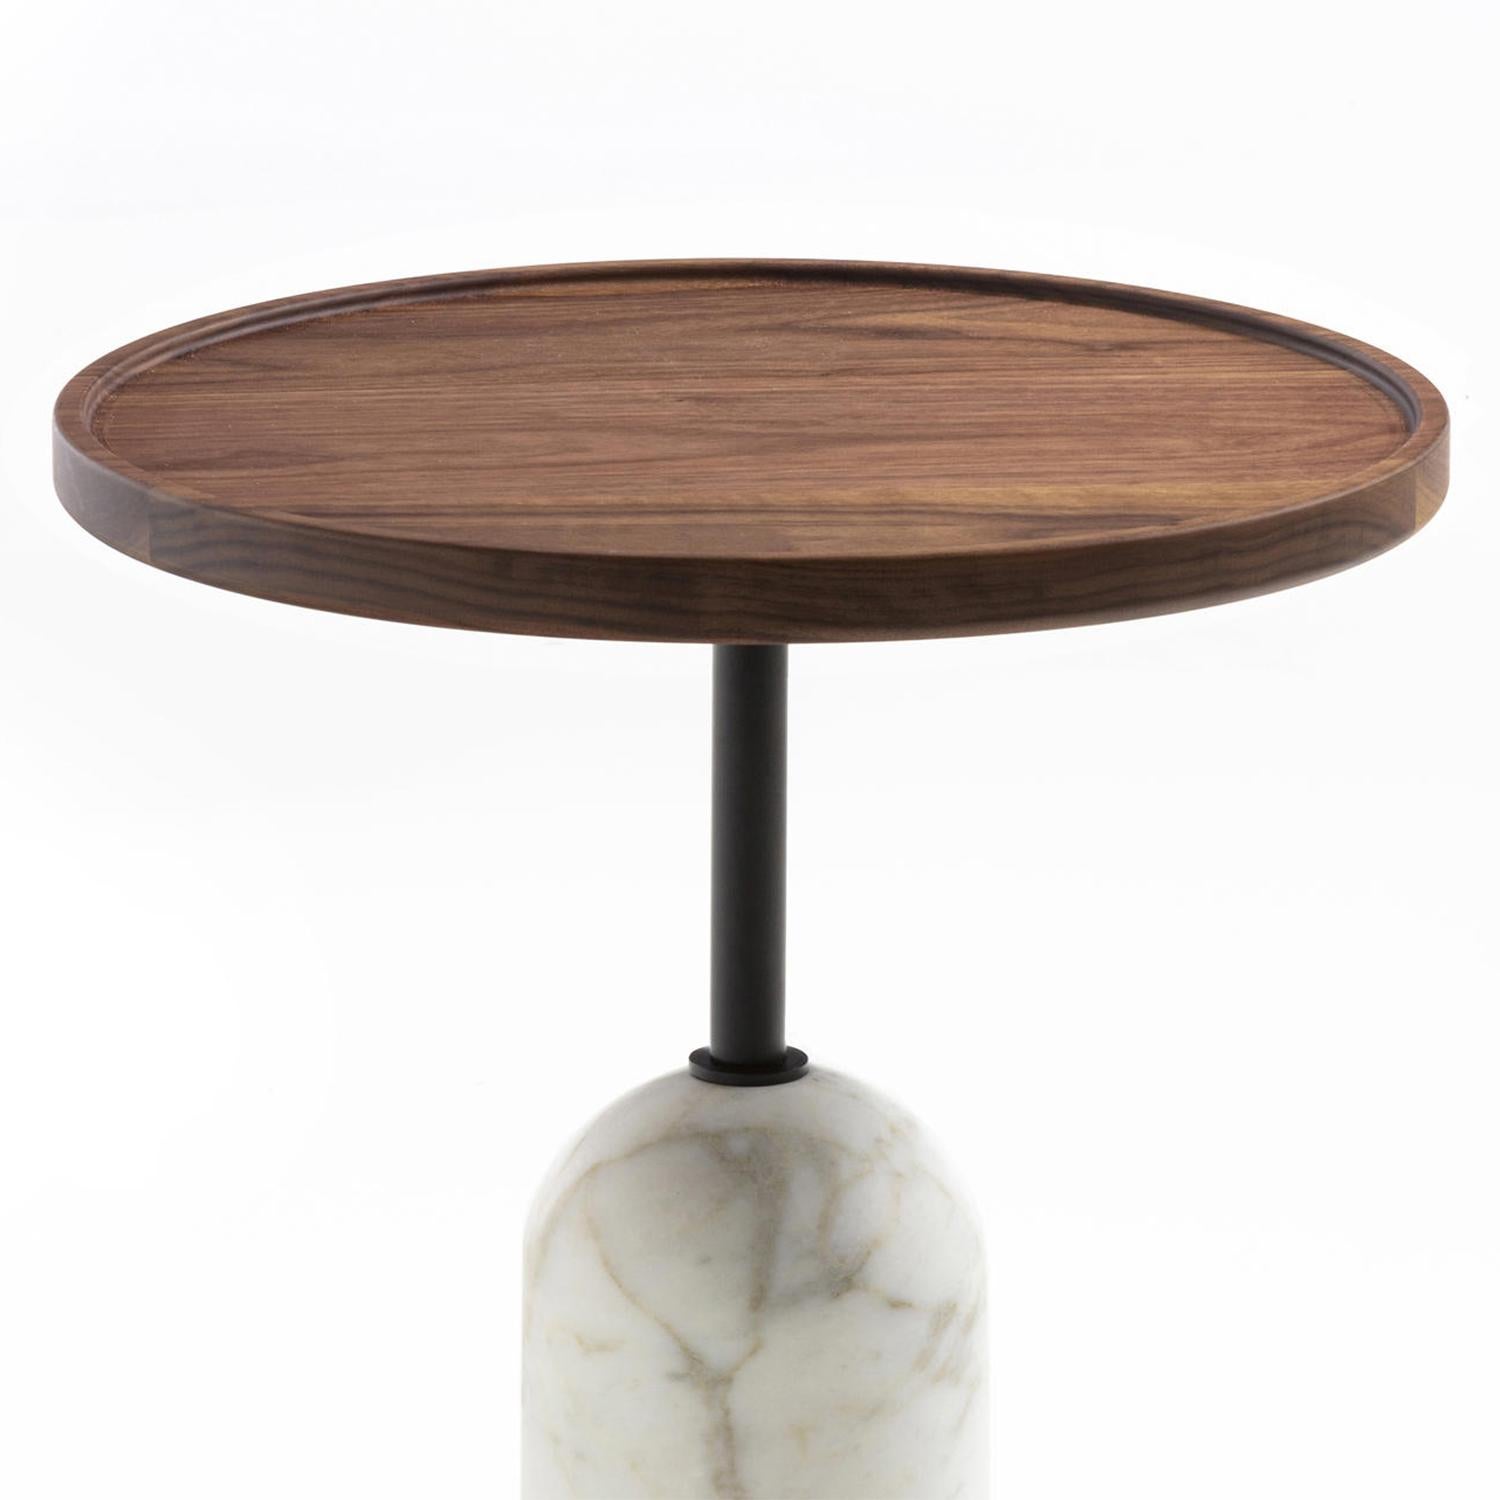 Side table Stelle round with white Carrara marble
base with black matt metal rod.
Base is 14cm diameter. With round solid walnut top.
Also available with Carnico dark grey marble base.
Also available in height 50cm or 60cm.